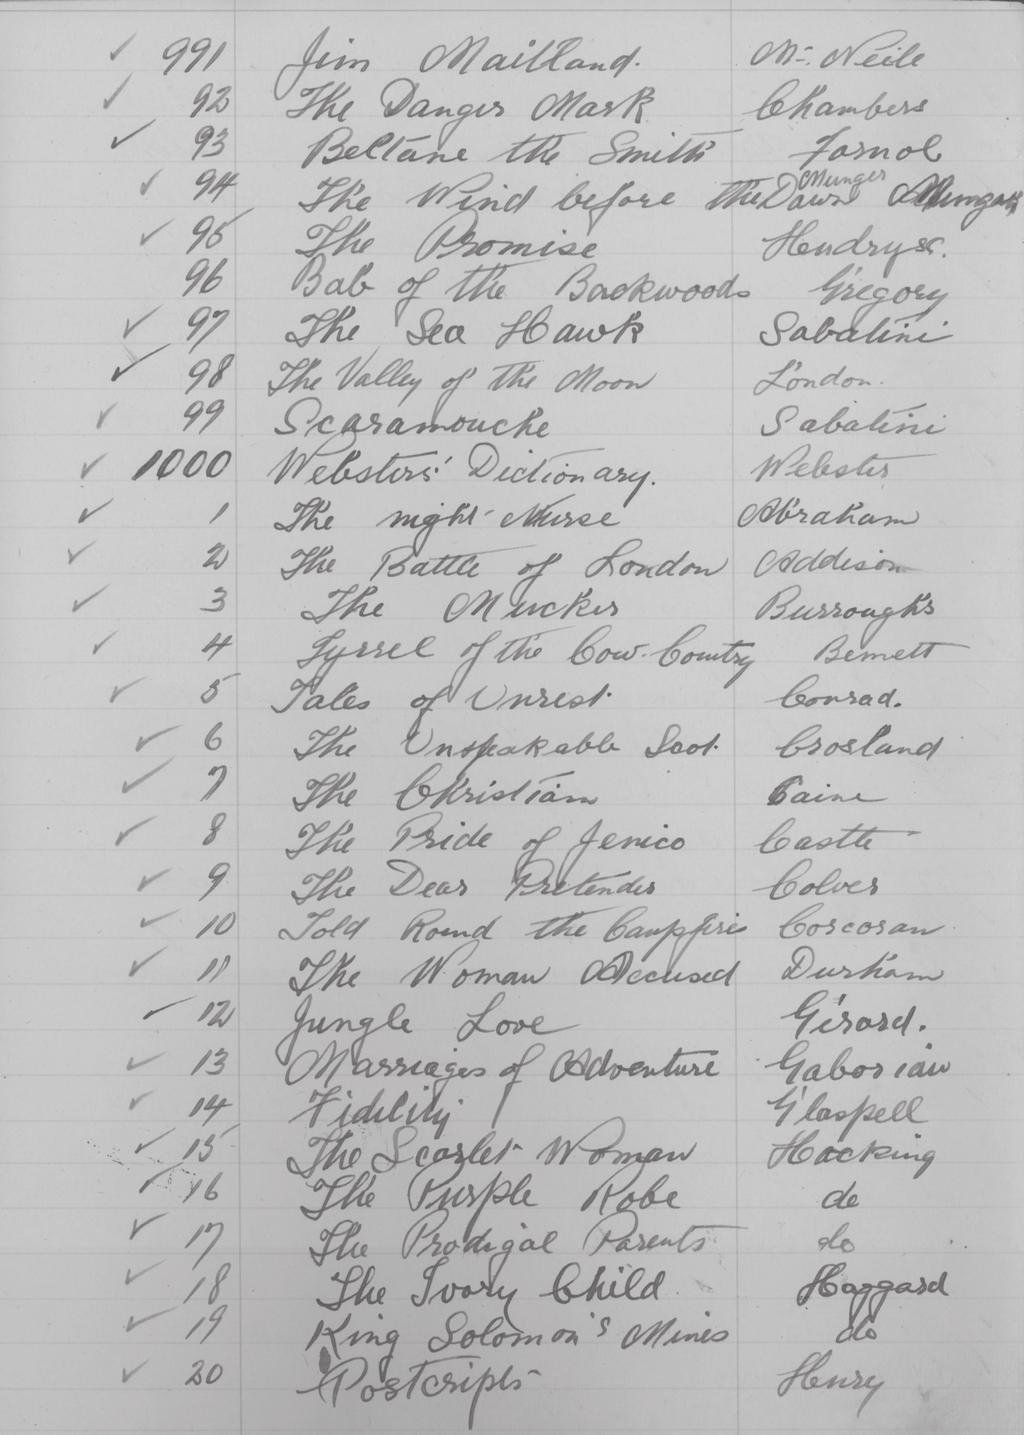 Extract from the School of Arts handwritten register of 4,454 library books,